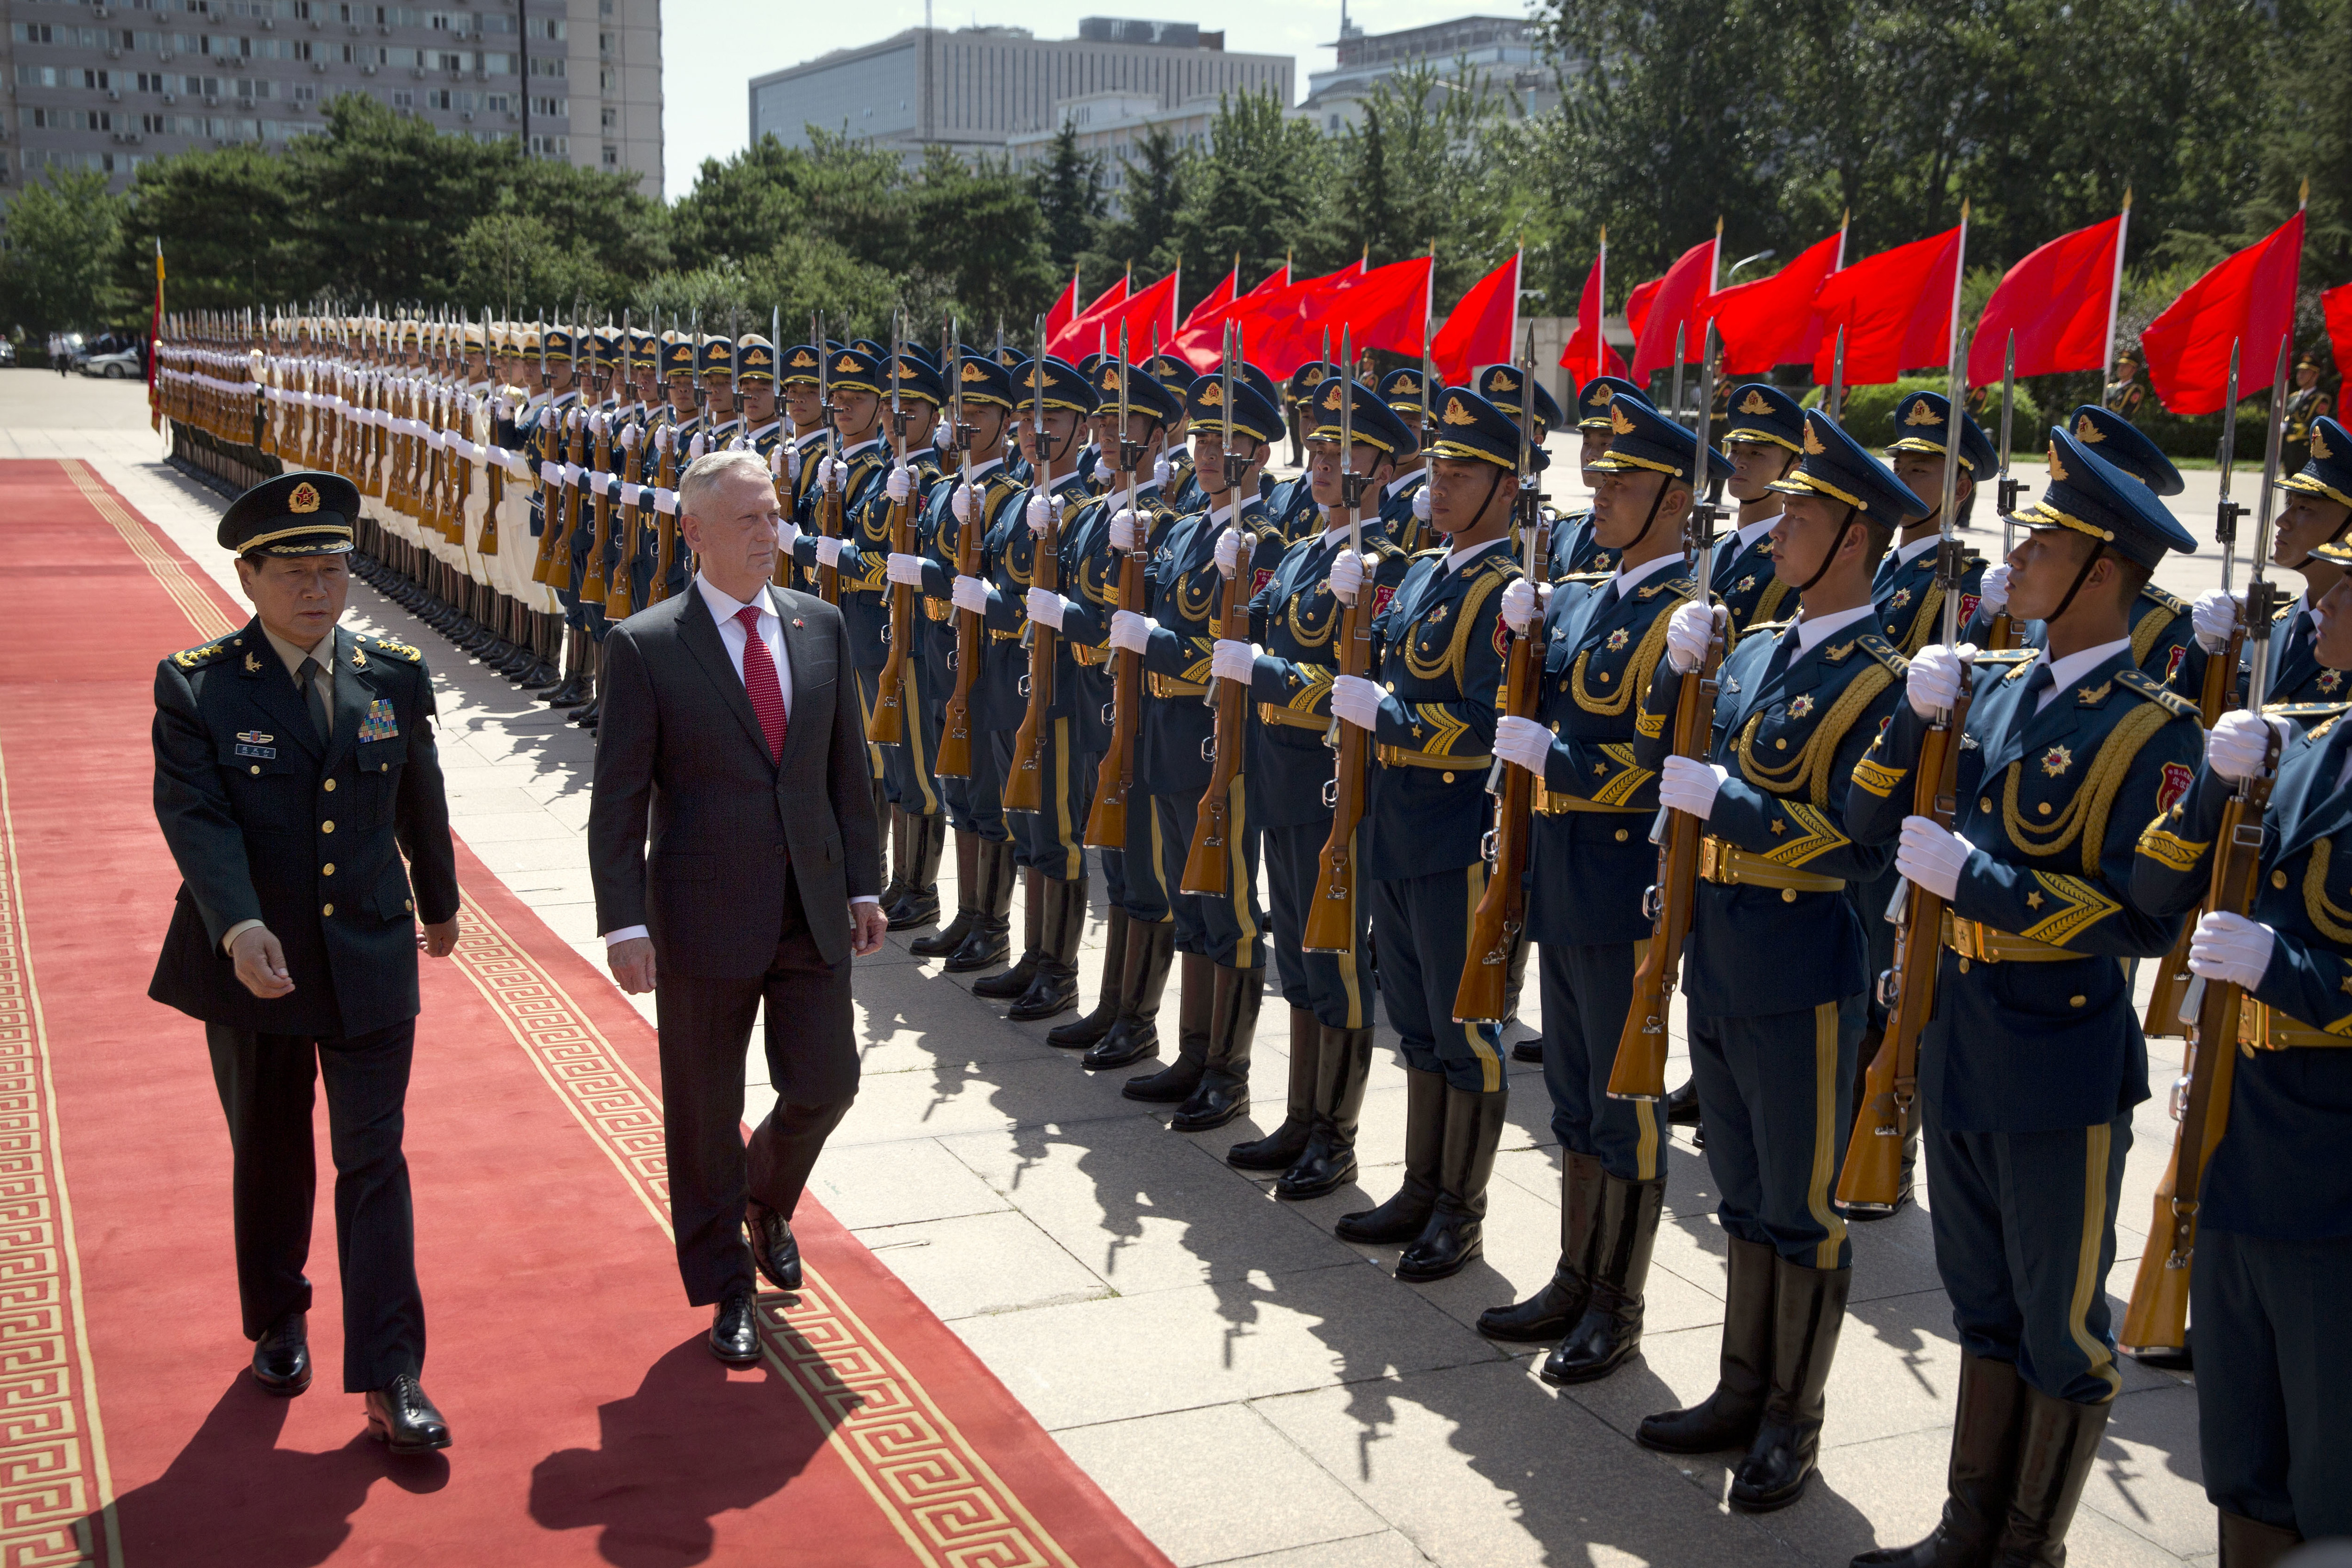 China's Defense Minister Wei Fenghe, left, and U.S. Defense Secretary Jim Mattis review an honor guard during a welcome ceremony at the Bayi Building in Beijing, Wednesday, June 27, 2018. (AP Photo/Mark Schiefelbein, Pool)